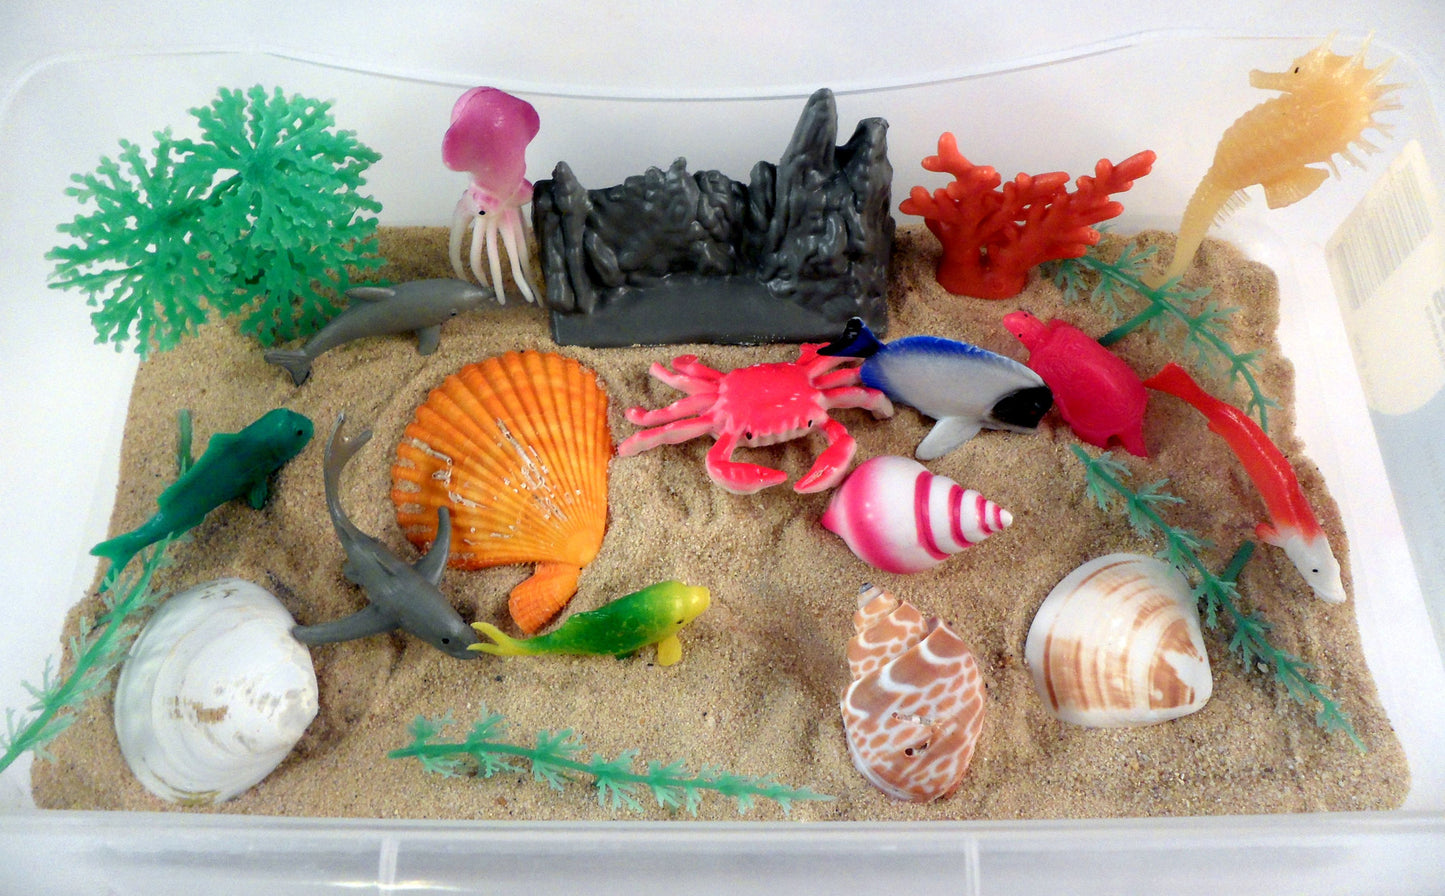 Design a hermit crab habitat - A House for Hermit Crab - Ivy Kids subscription box activities.